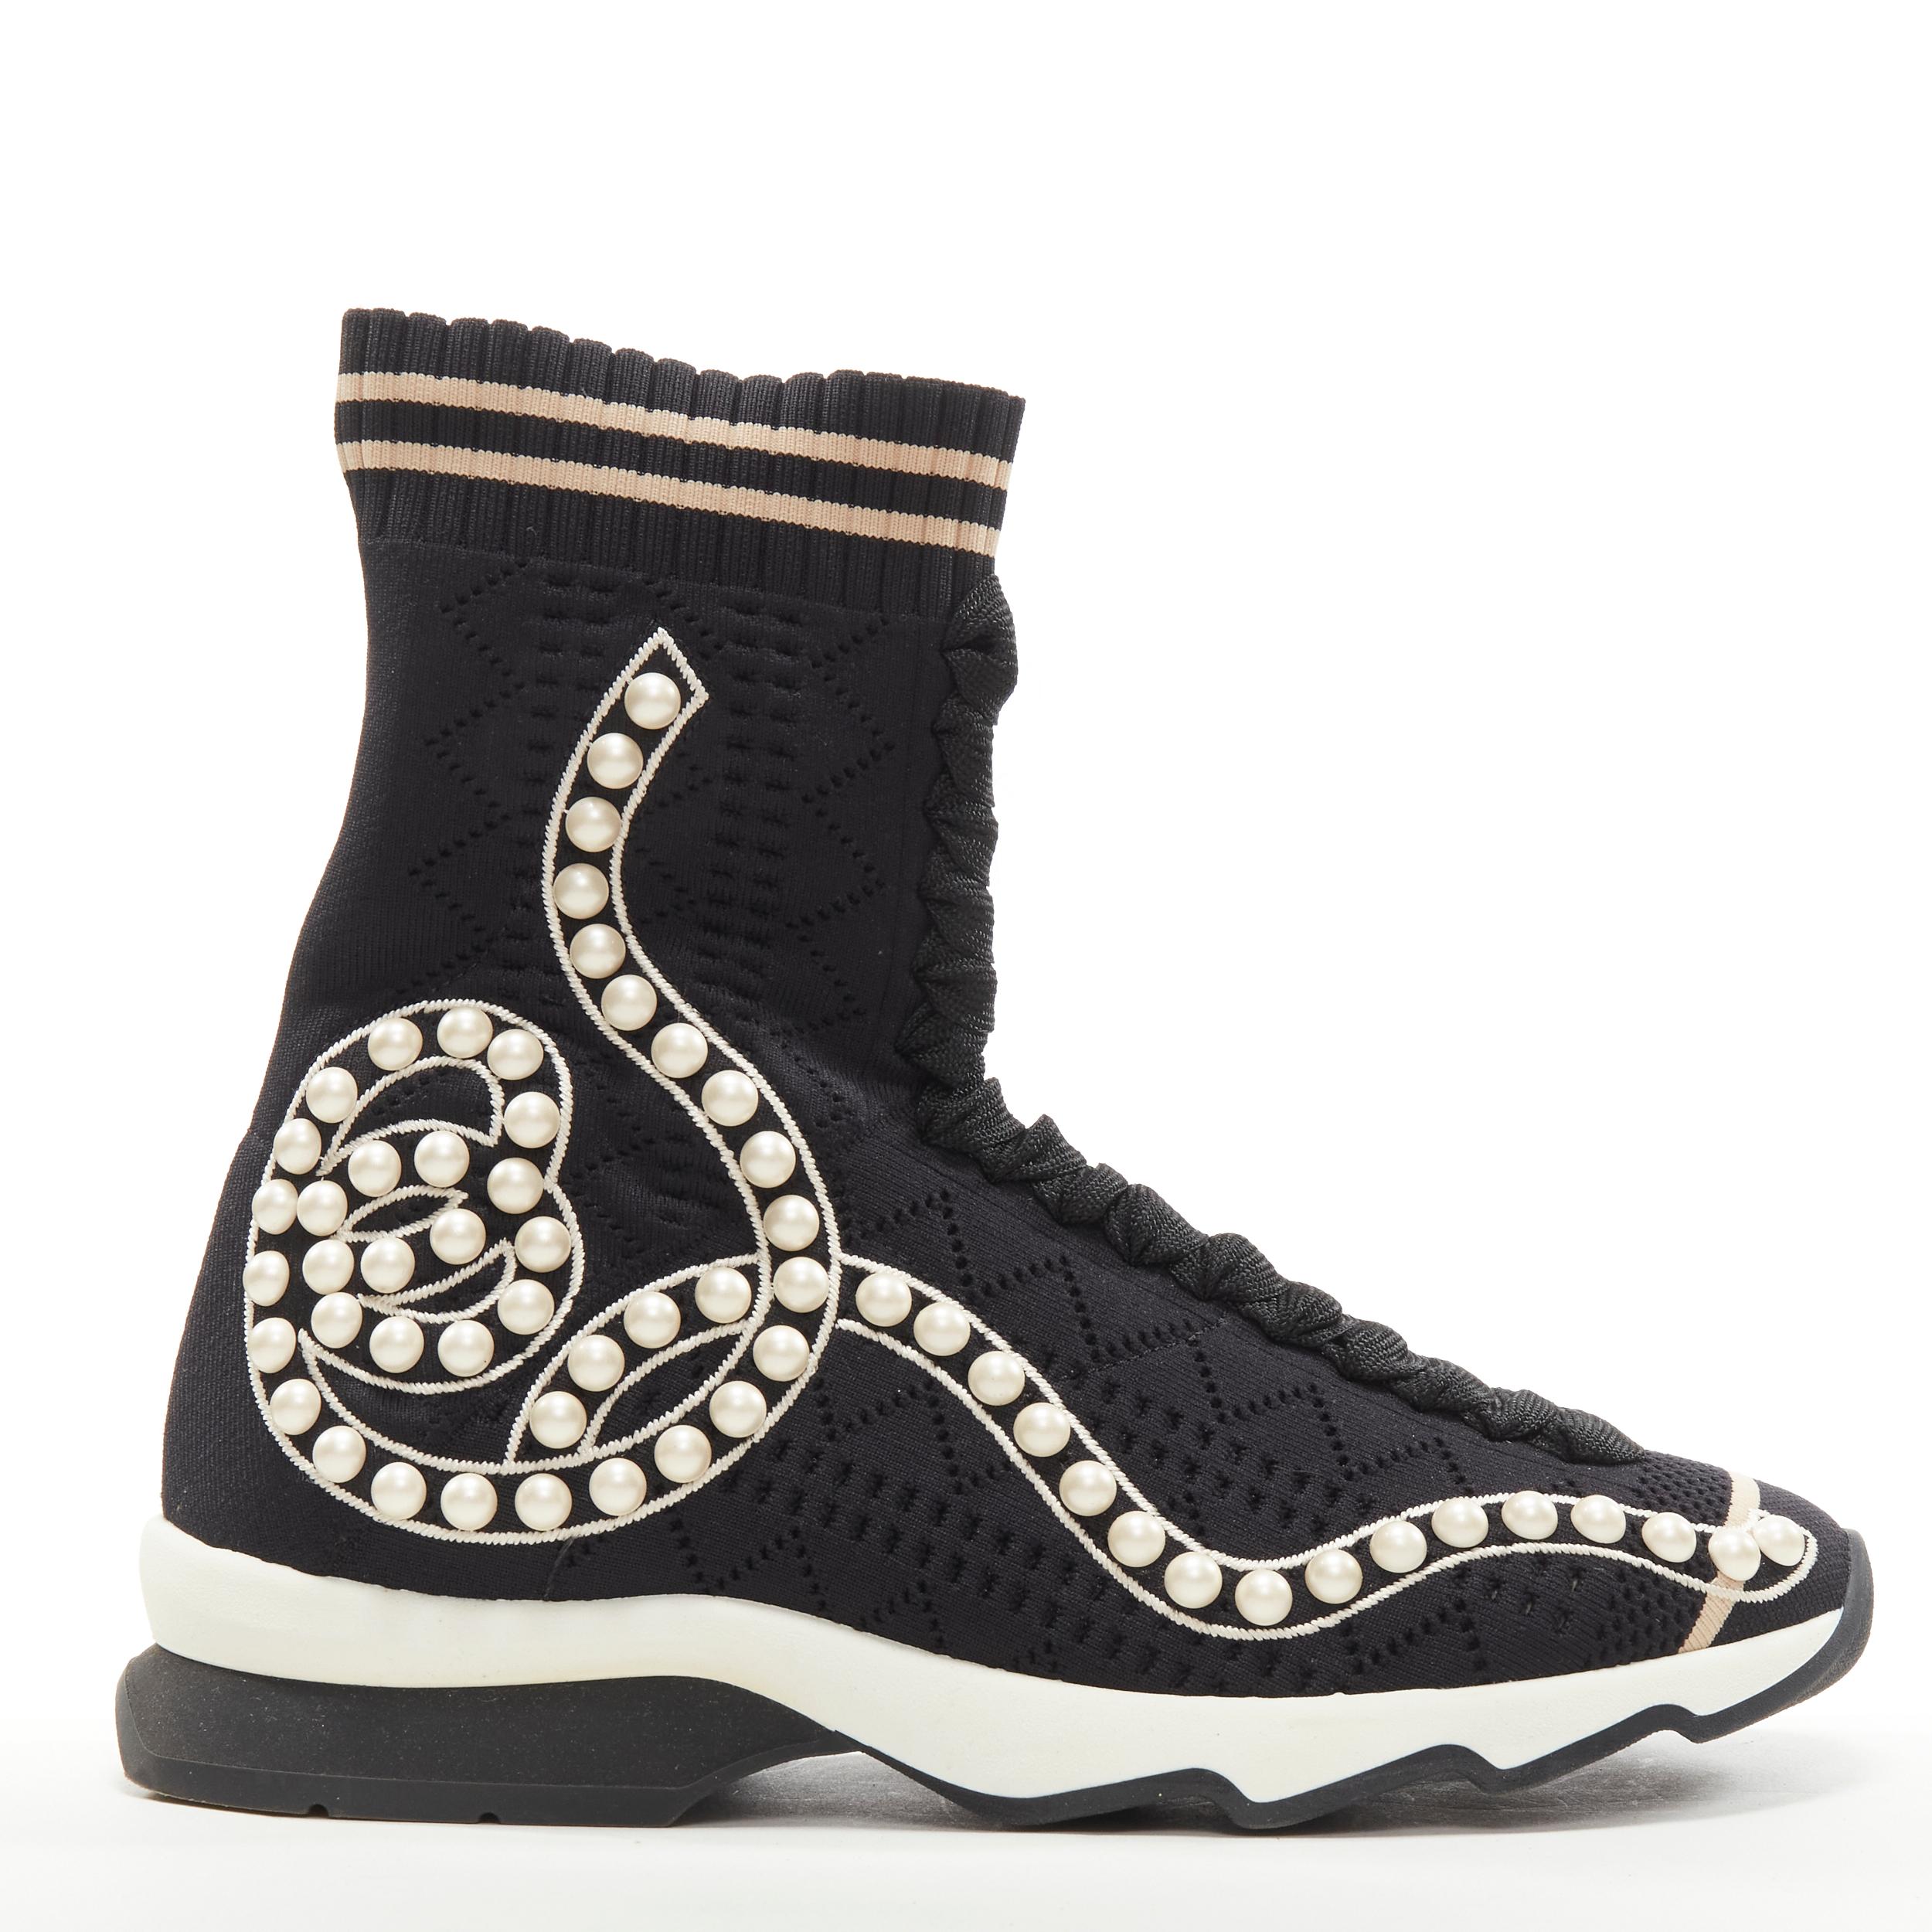 FENDI Rockoko black pearl embellished black sock knit high top sneaker EU36 
Reference: ANWU/A00371 
Brand: Fendi 
Model: Rockoko 
Material: Fabric 
Color: Black 
Pattern: Solid 
Extra Detail: Stretch fit. Perforated sock knit with faux pearl